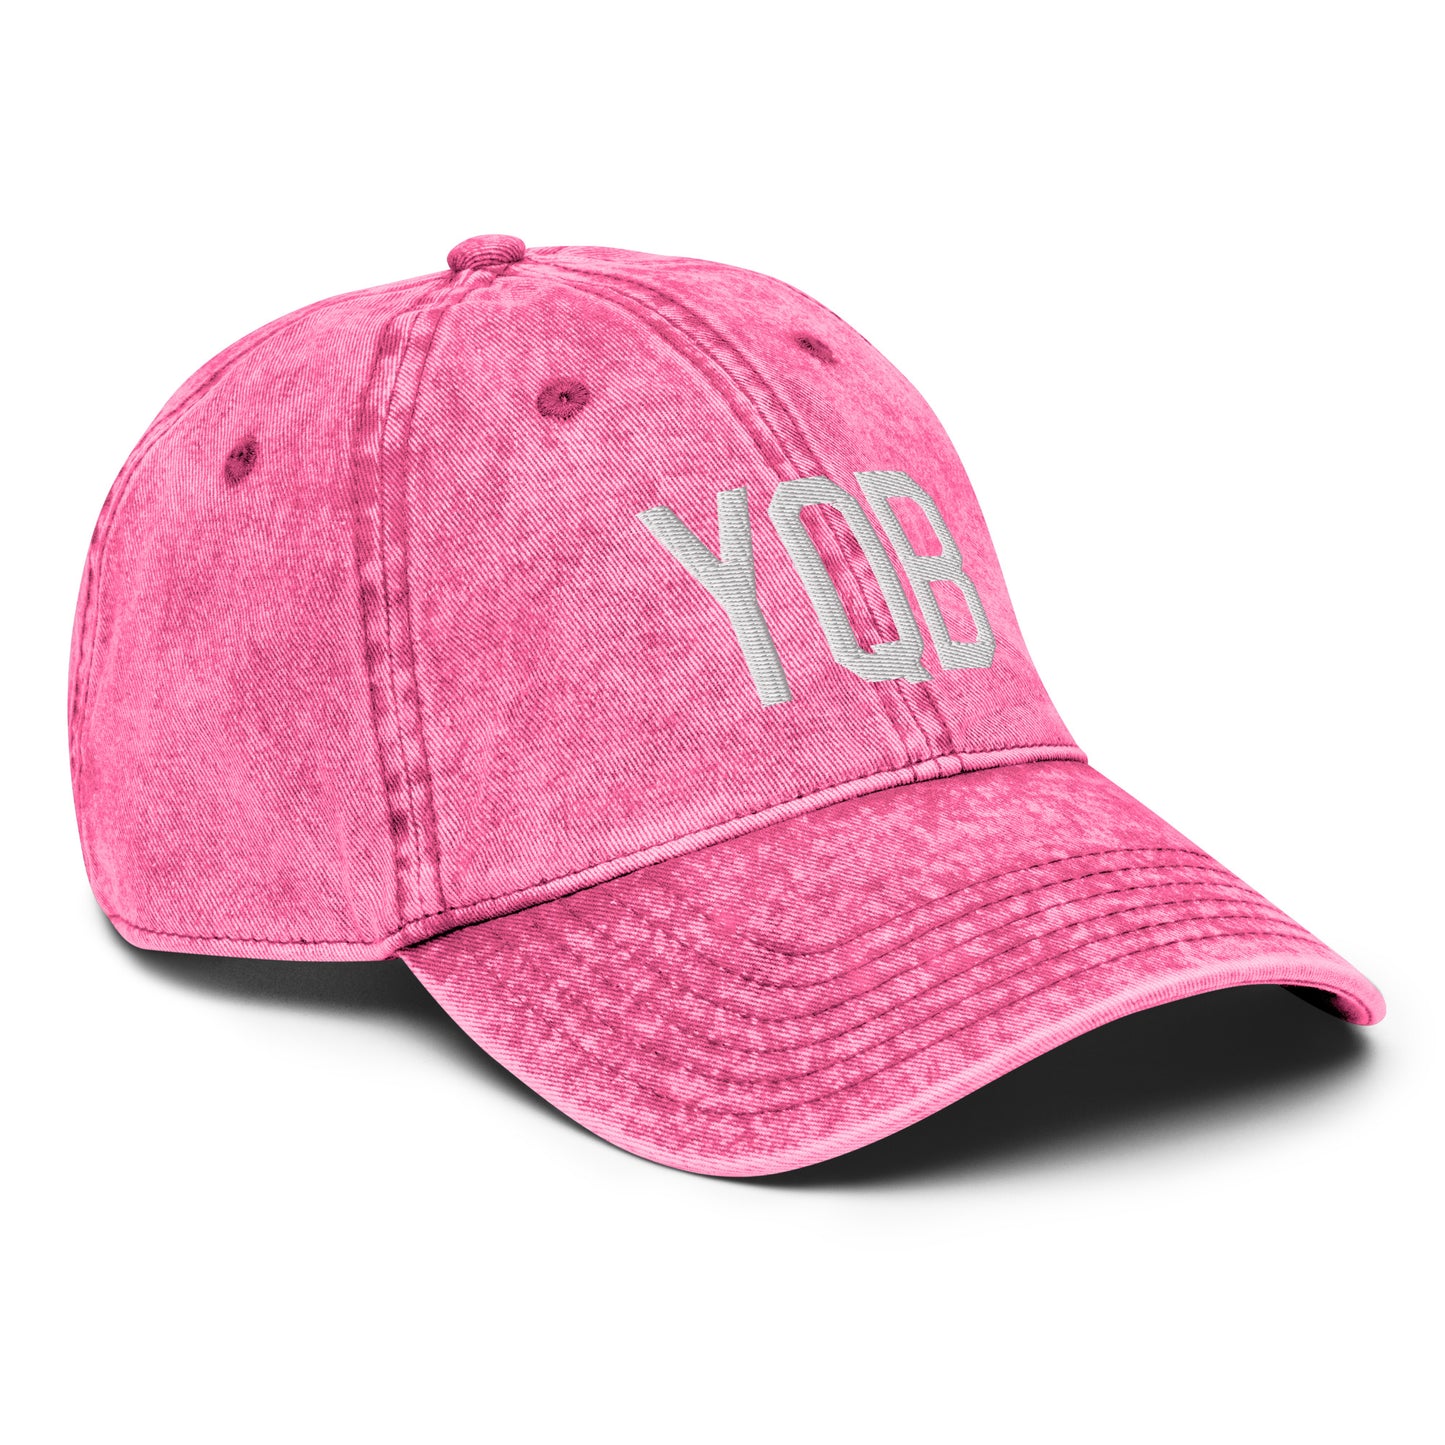 Airport Code Twill Cap - White • YQB Quebec City • YHM Designs - Image 27